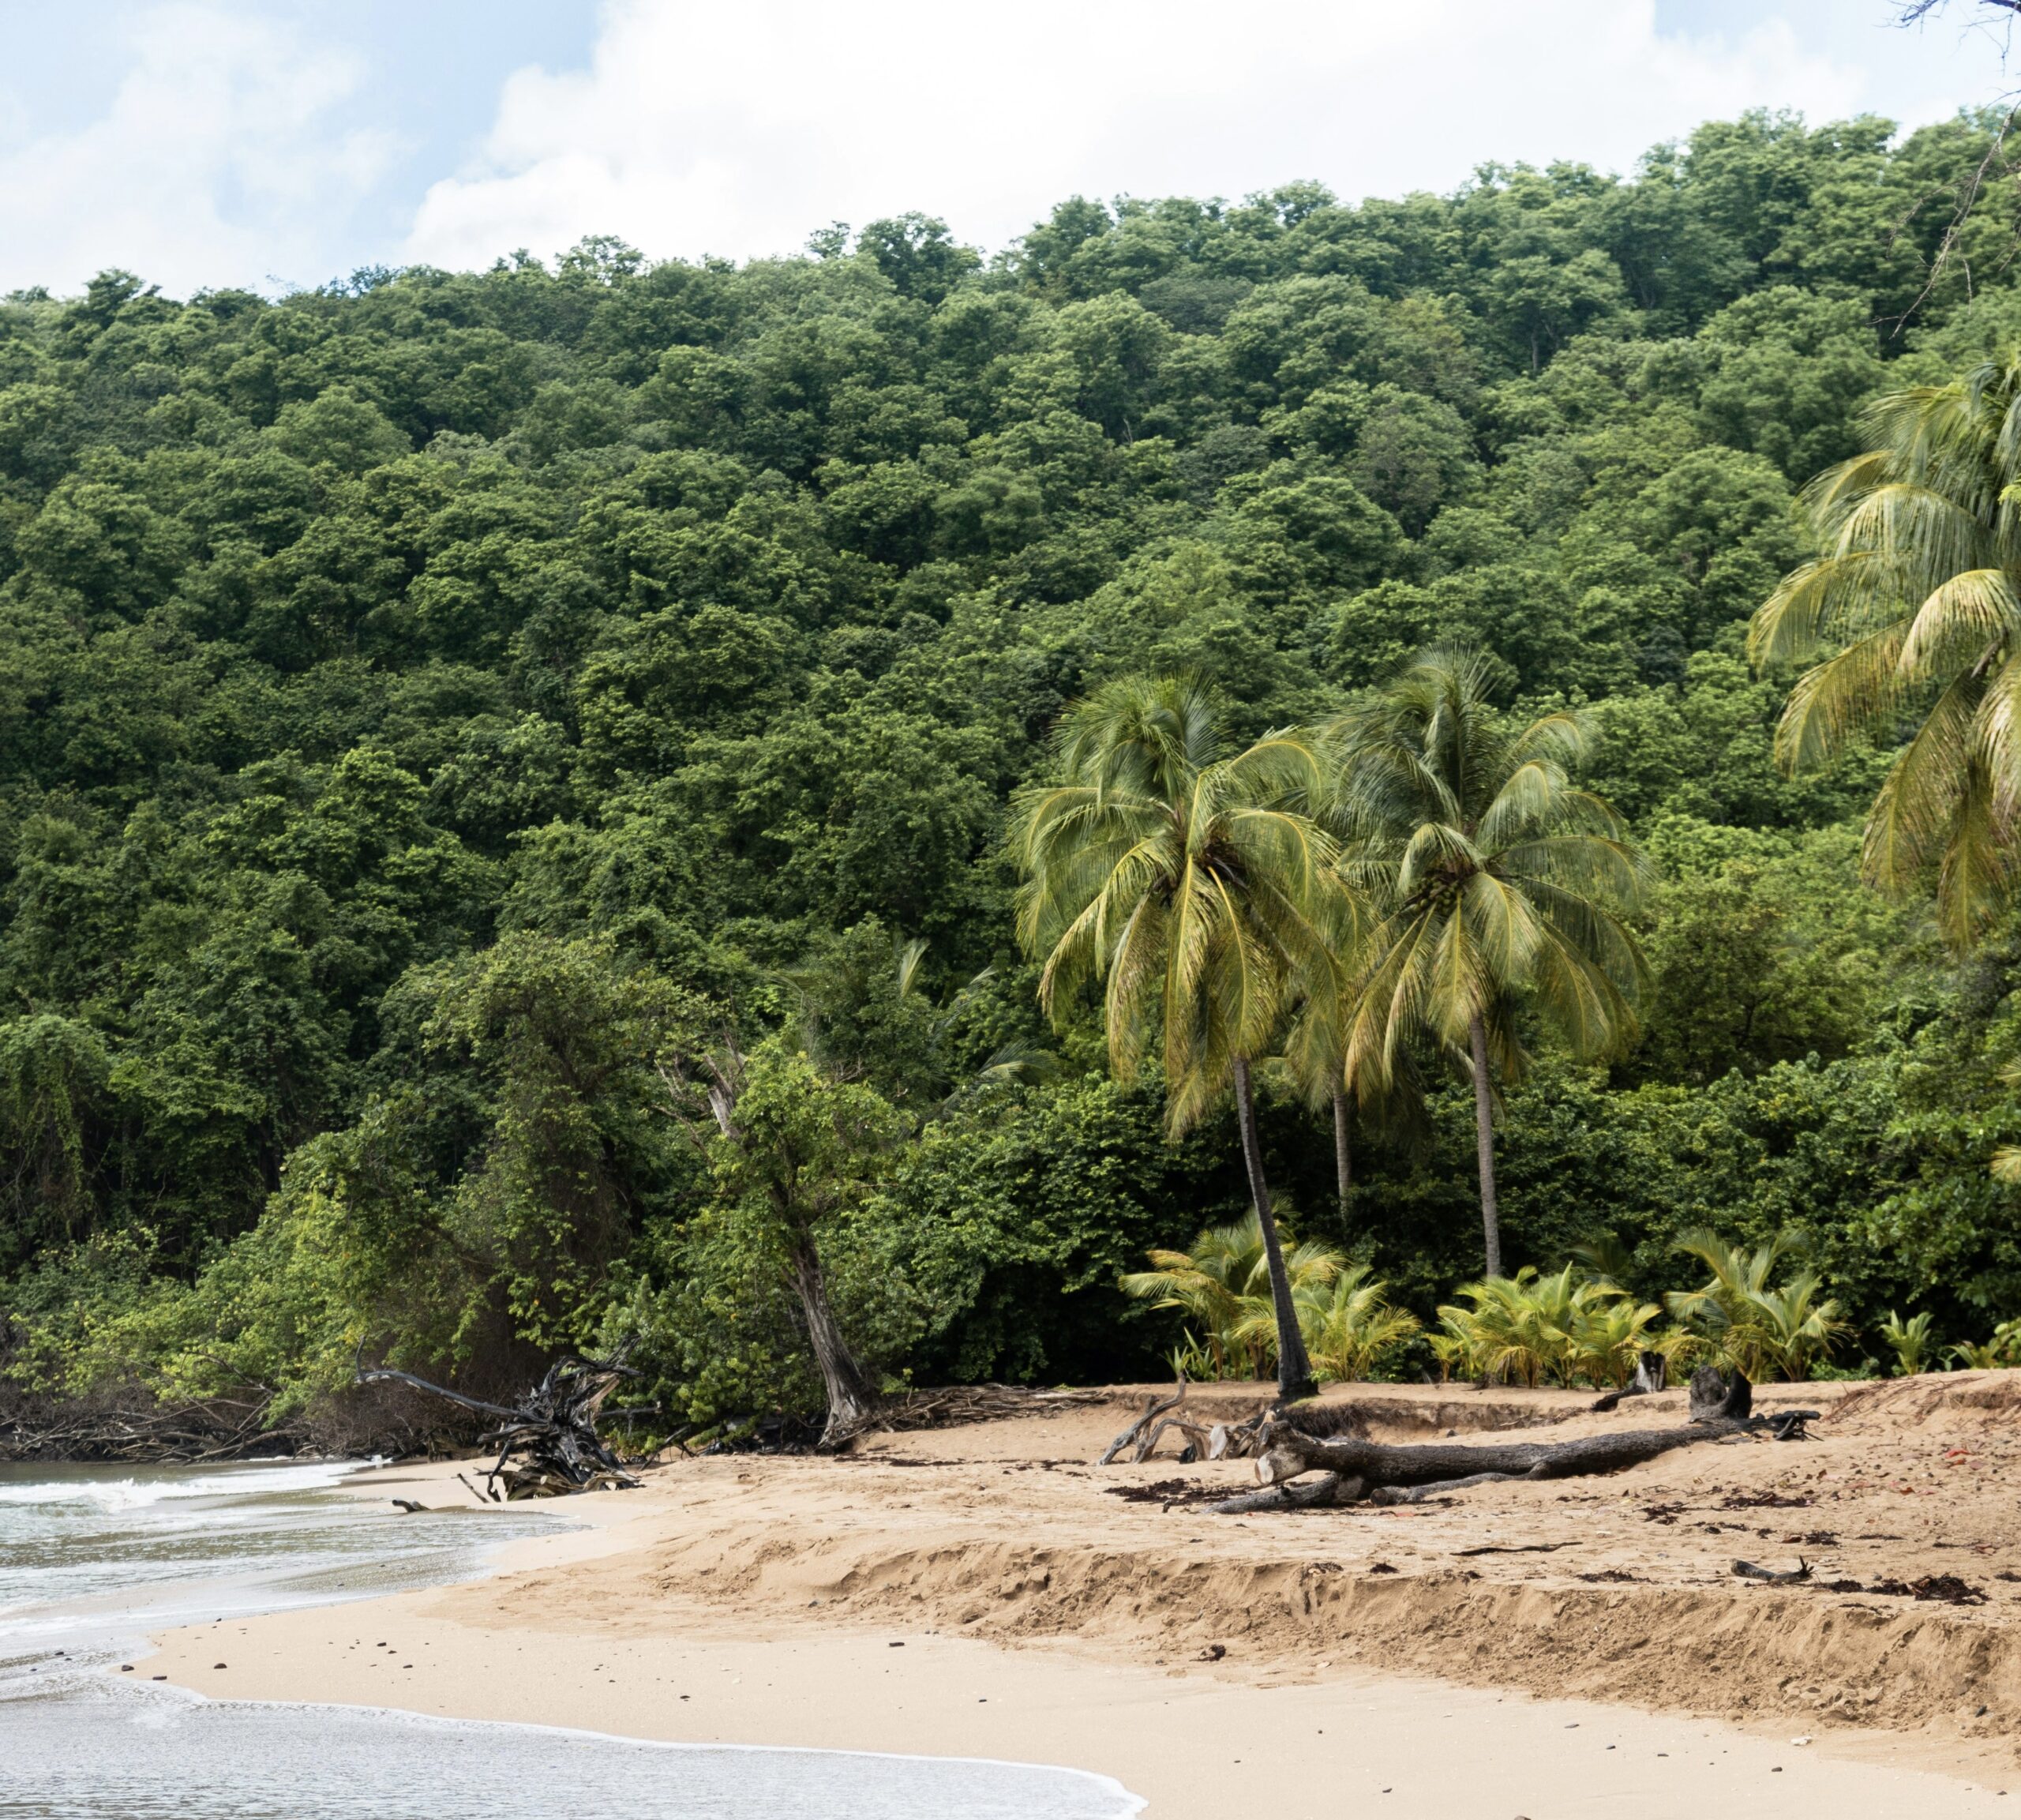 This restaurant is a very important filming location for the series “Death in Paradise”.
Pictured: the lush green beach of Guadeloupe 